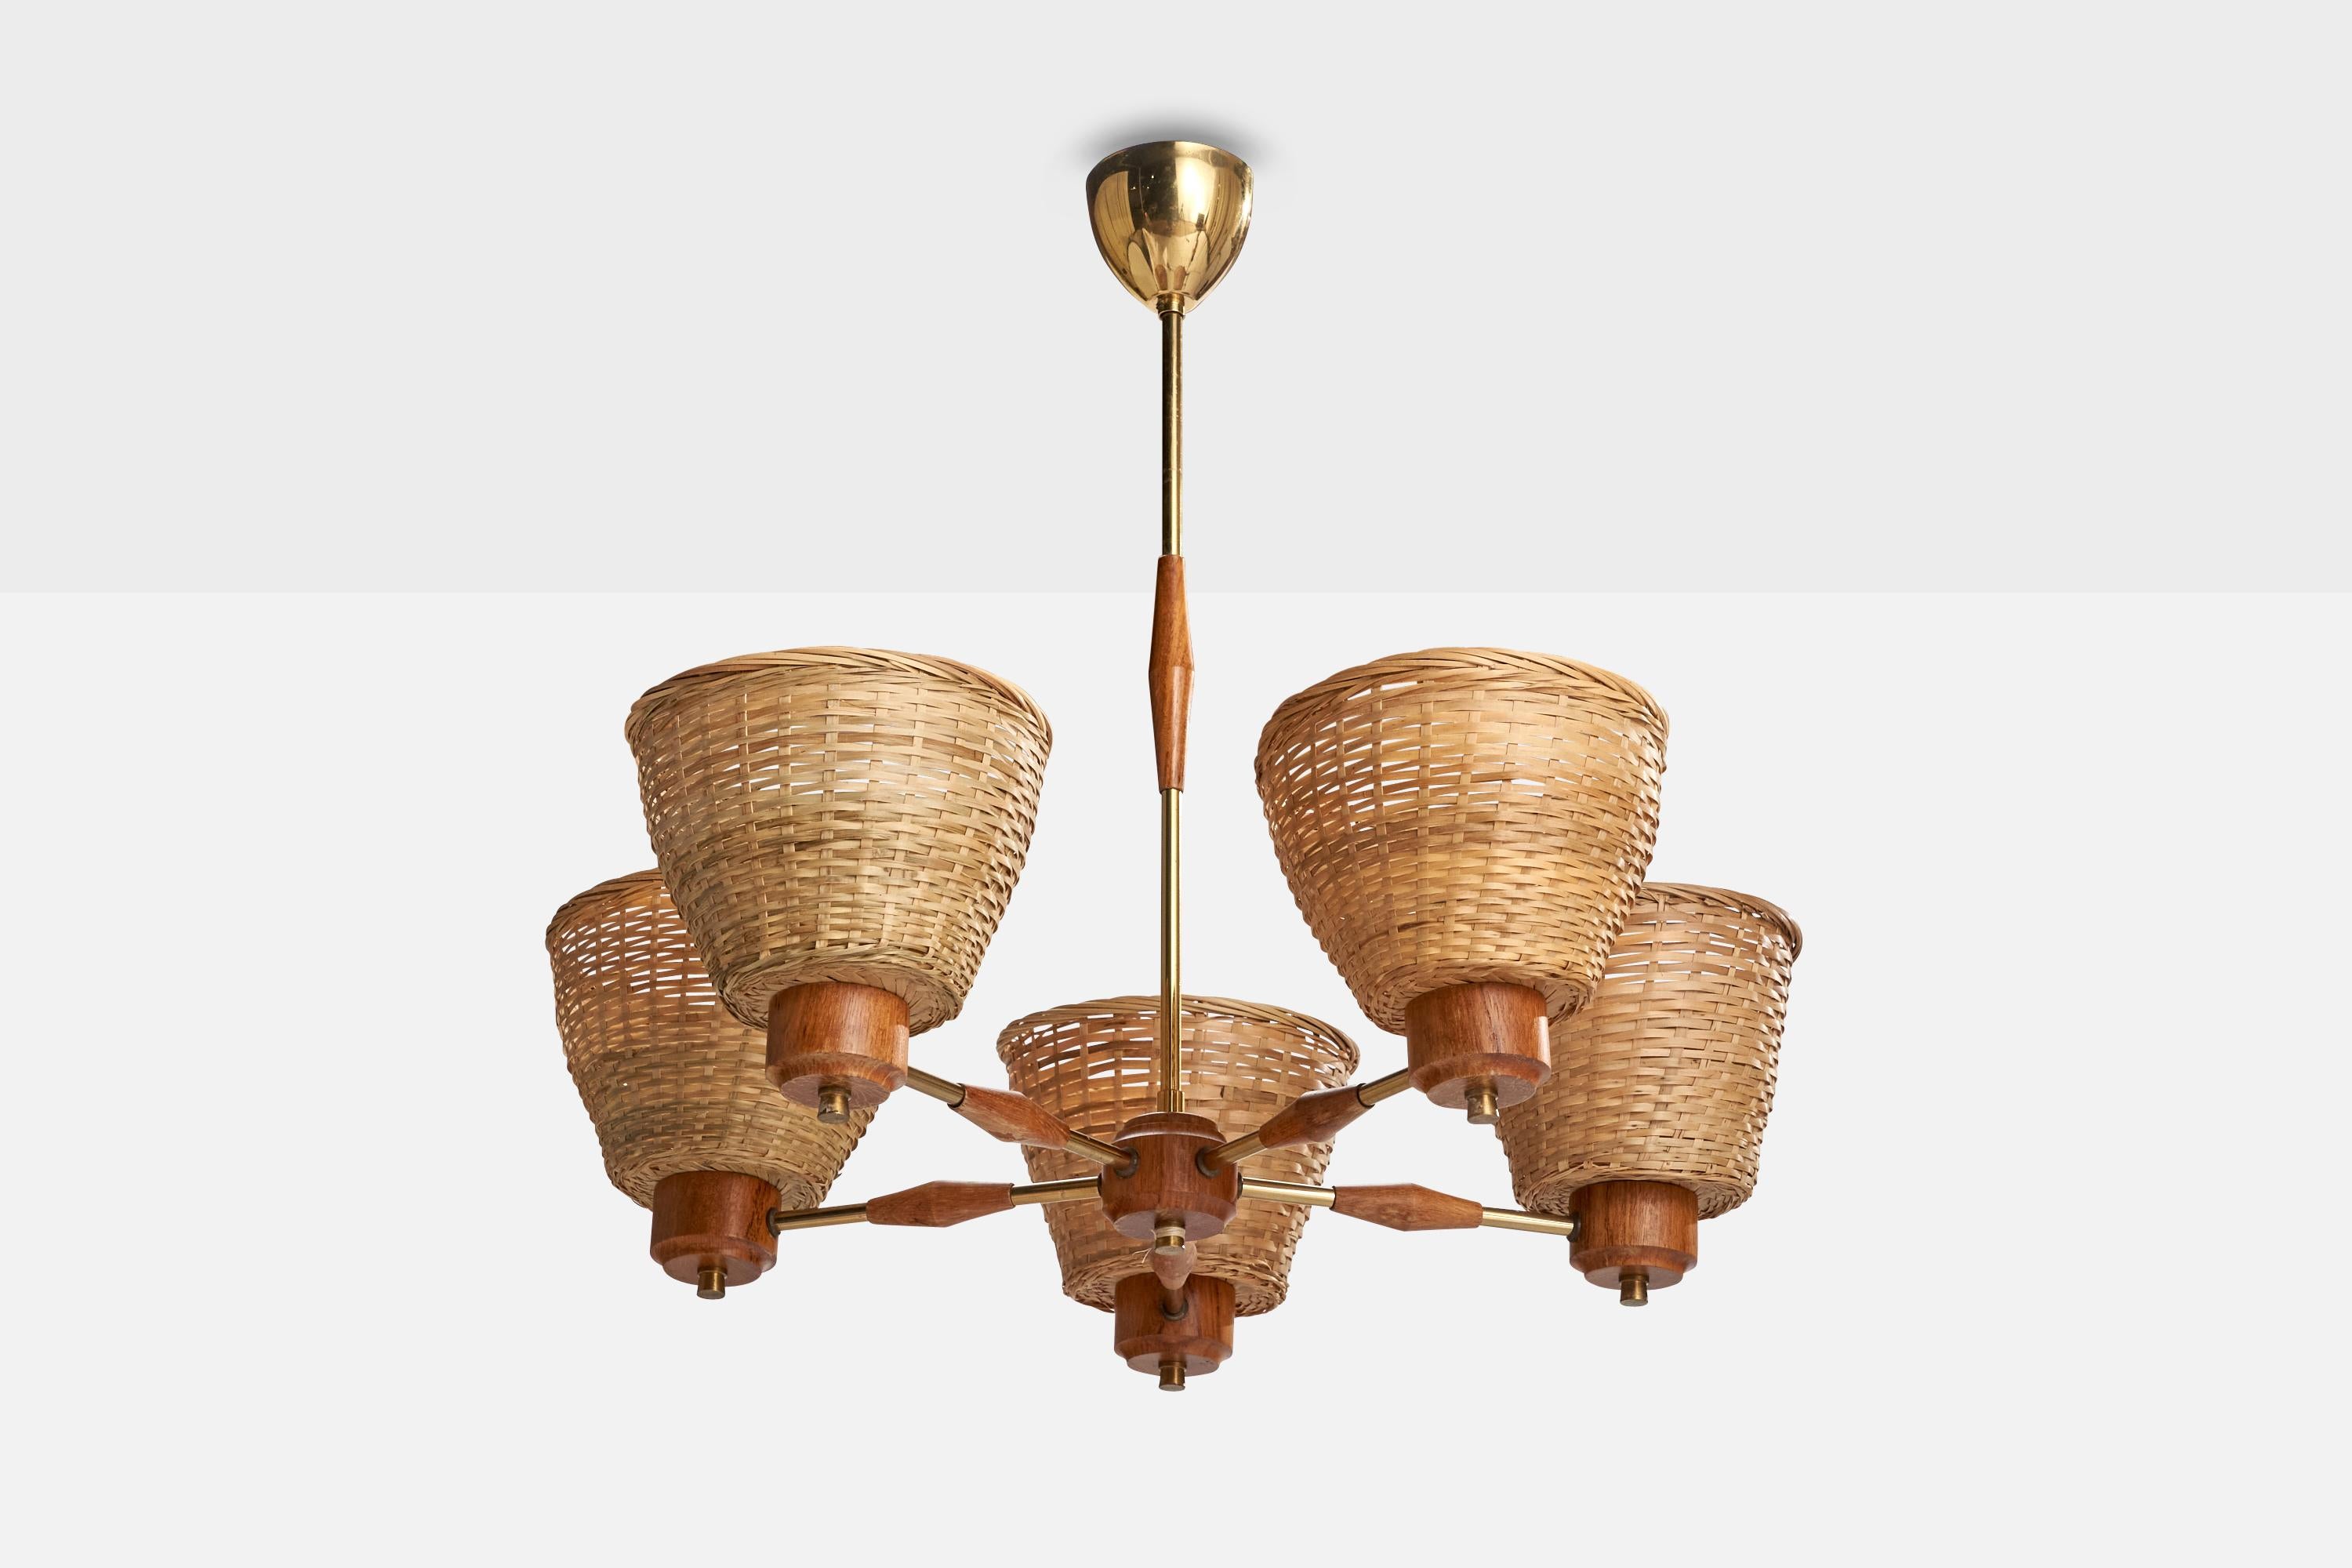 A teak, brass and rattan chandelier designed and produced in Sweden, c. 1950s.

Dimensions of canopy (inches): 2.79” H x 3.08” Diameter
Socket takes standard E-26 bulbs. 5 socket.There is no maximum wattage stated on the fixture. All lighting will